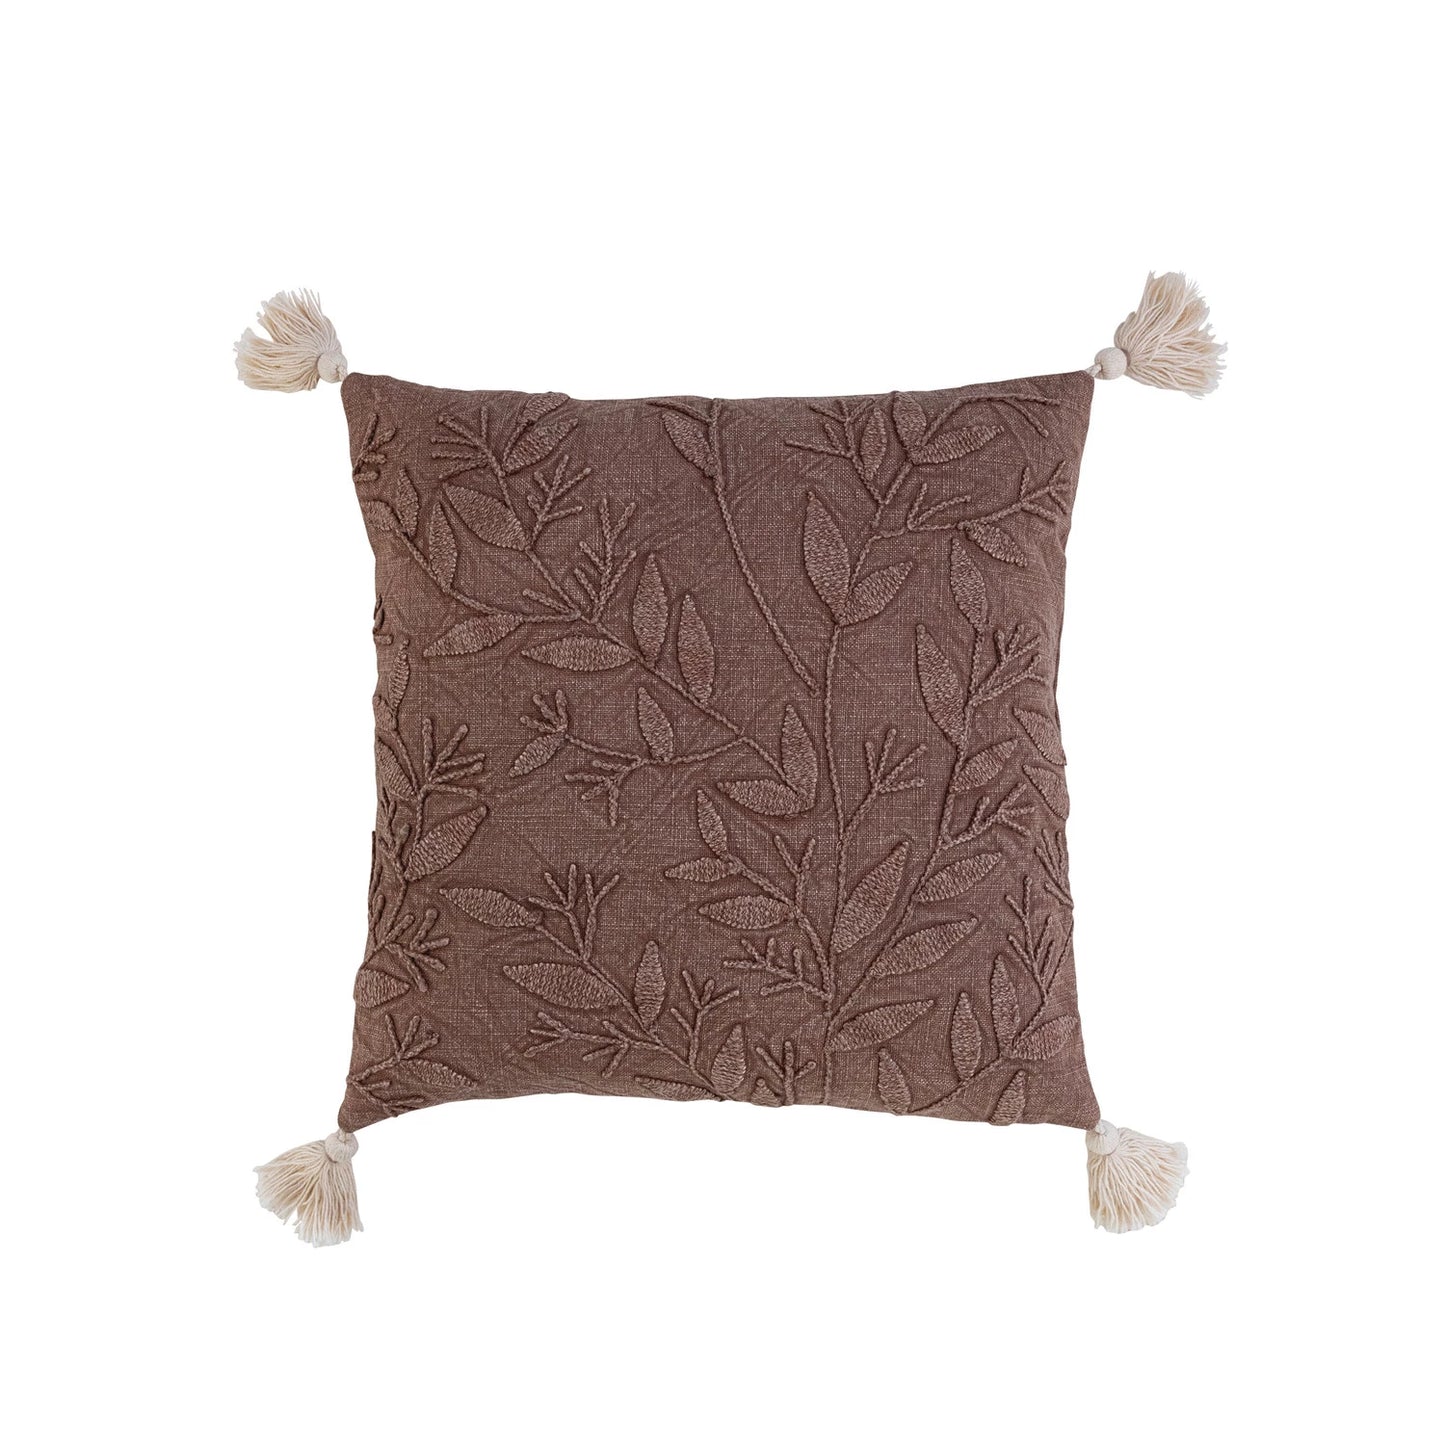 Embroidery Pillow, The Feathered Farmhouse